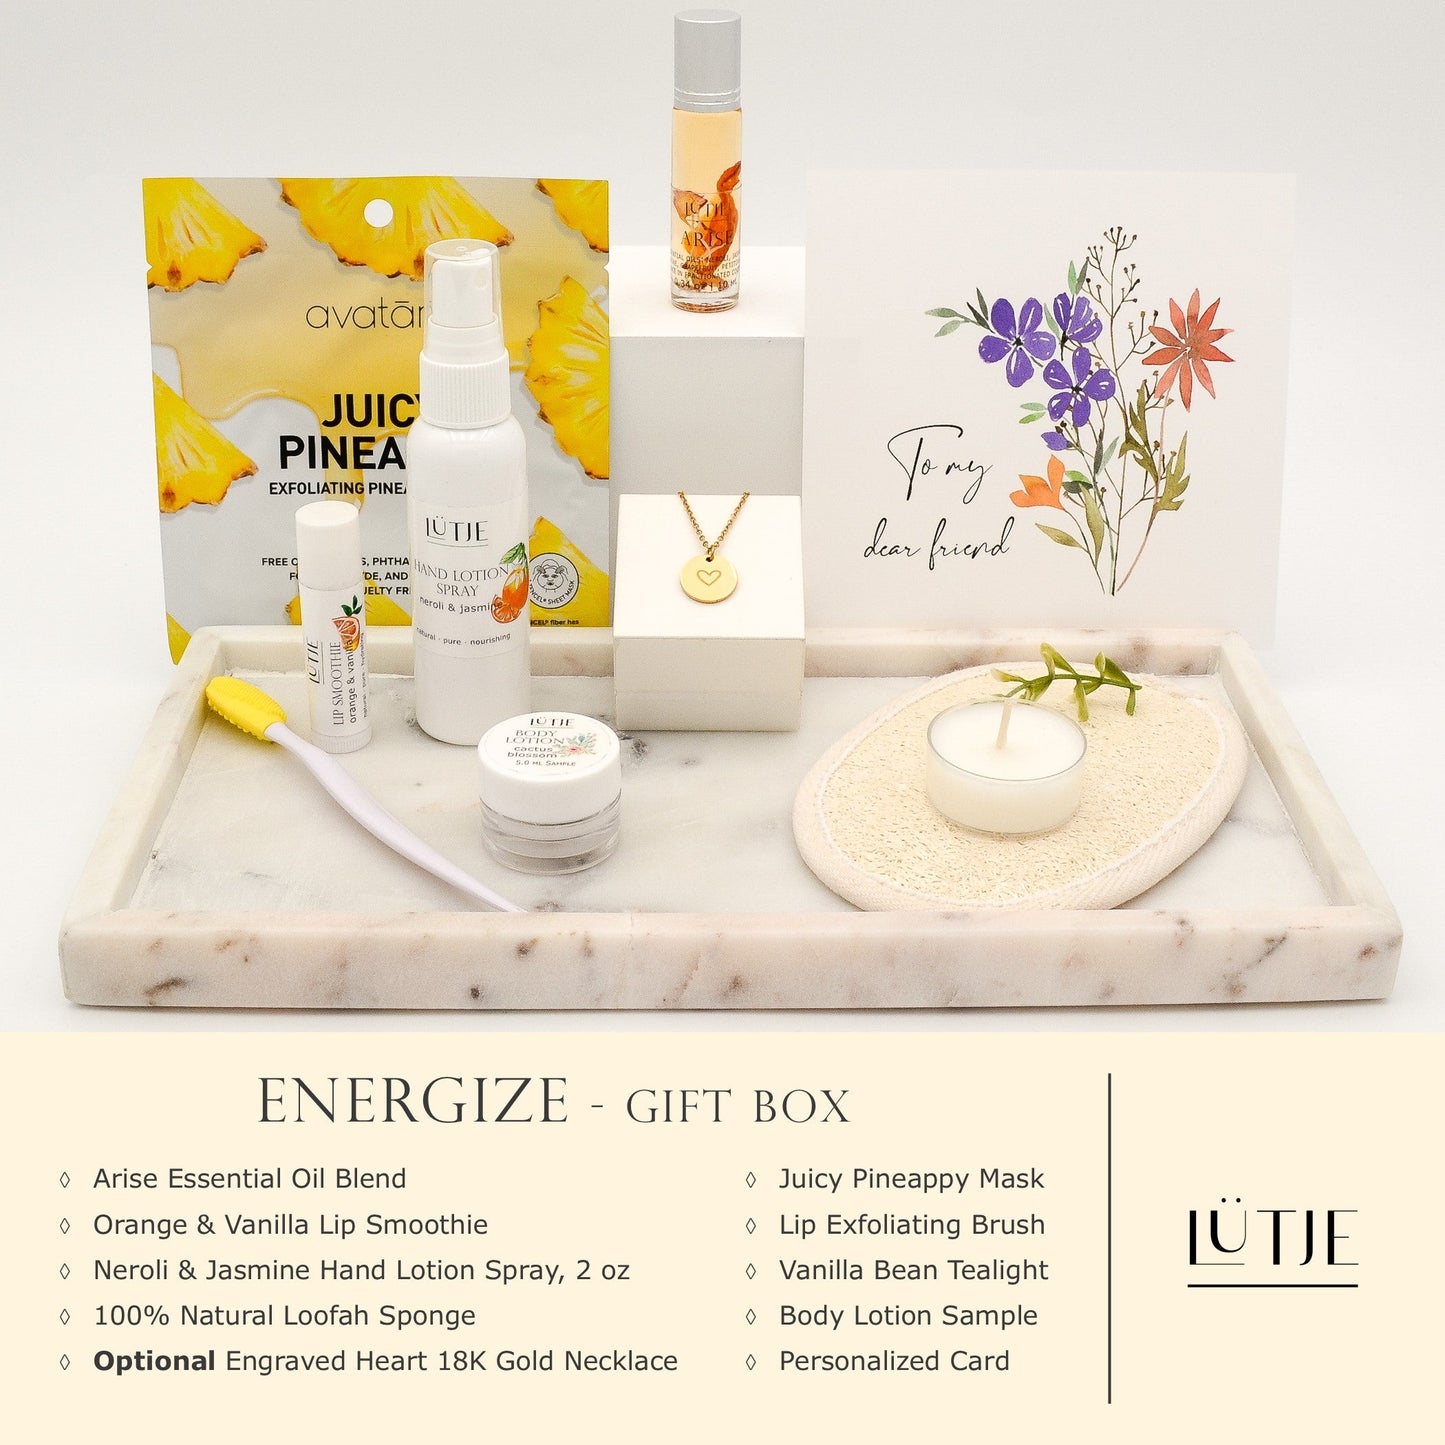 Energize Gift Box for women, BFF, wife, daughter, sister, mom, or grandma, includes Neroli & Jasmine hand lotion spray, essential oil, lip balm, hydrating face mask, other bath, spa and self-care items, and optional 18K gold-plated necklace with engraved heart.